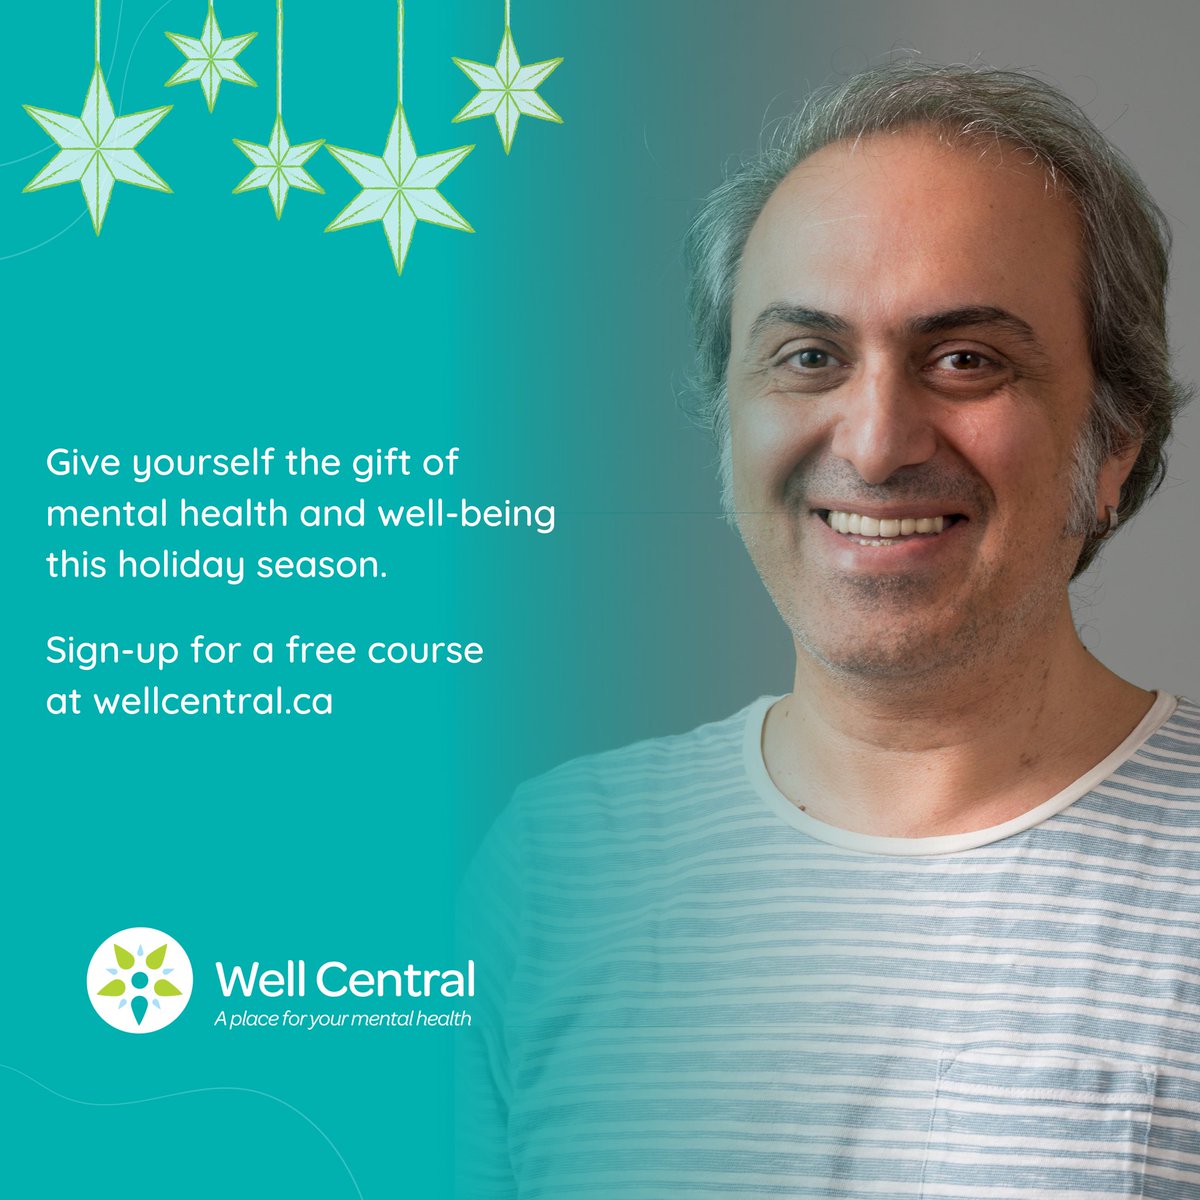 Have you picked a gift for yourself already?

Give yourself the gift of mental health and #wellbeing this #Christmas. #WellCentral has a variety of free #mentalhealthcourses that you can take while you enjoy your holiday break. 

Visit wellcentral.ca now to sign up.